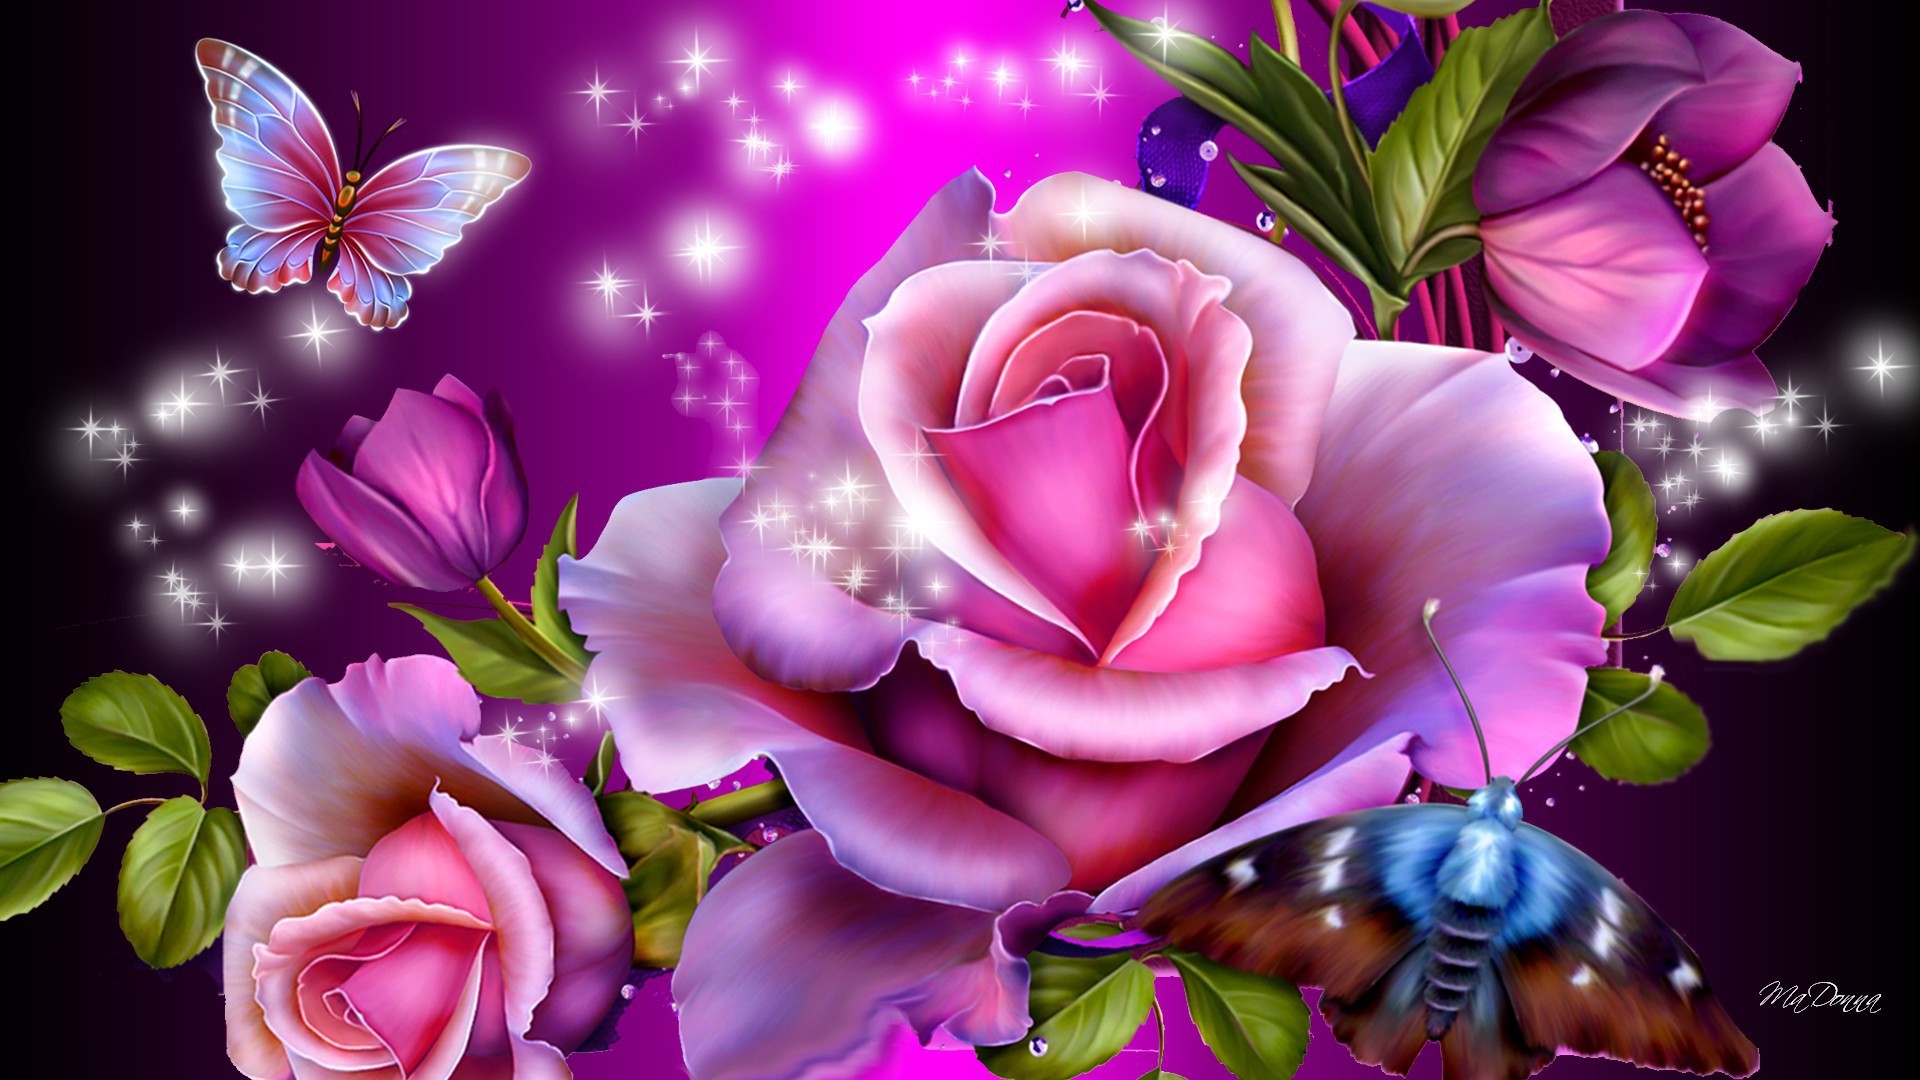 1920x1080 Flowers on Pinterest | Pink Flowers, Purple Roses and Flower Wallpaper |  Rose's Aren't Always Thorny | Pinterest | Flower wallpaper, Purple roses  and ...